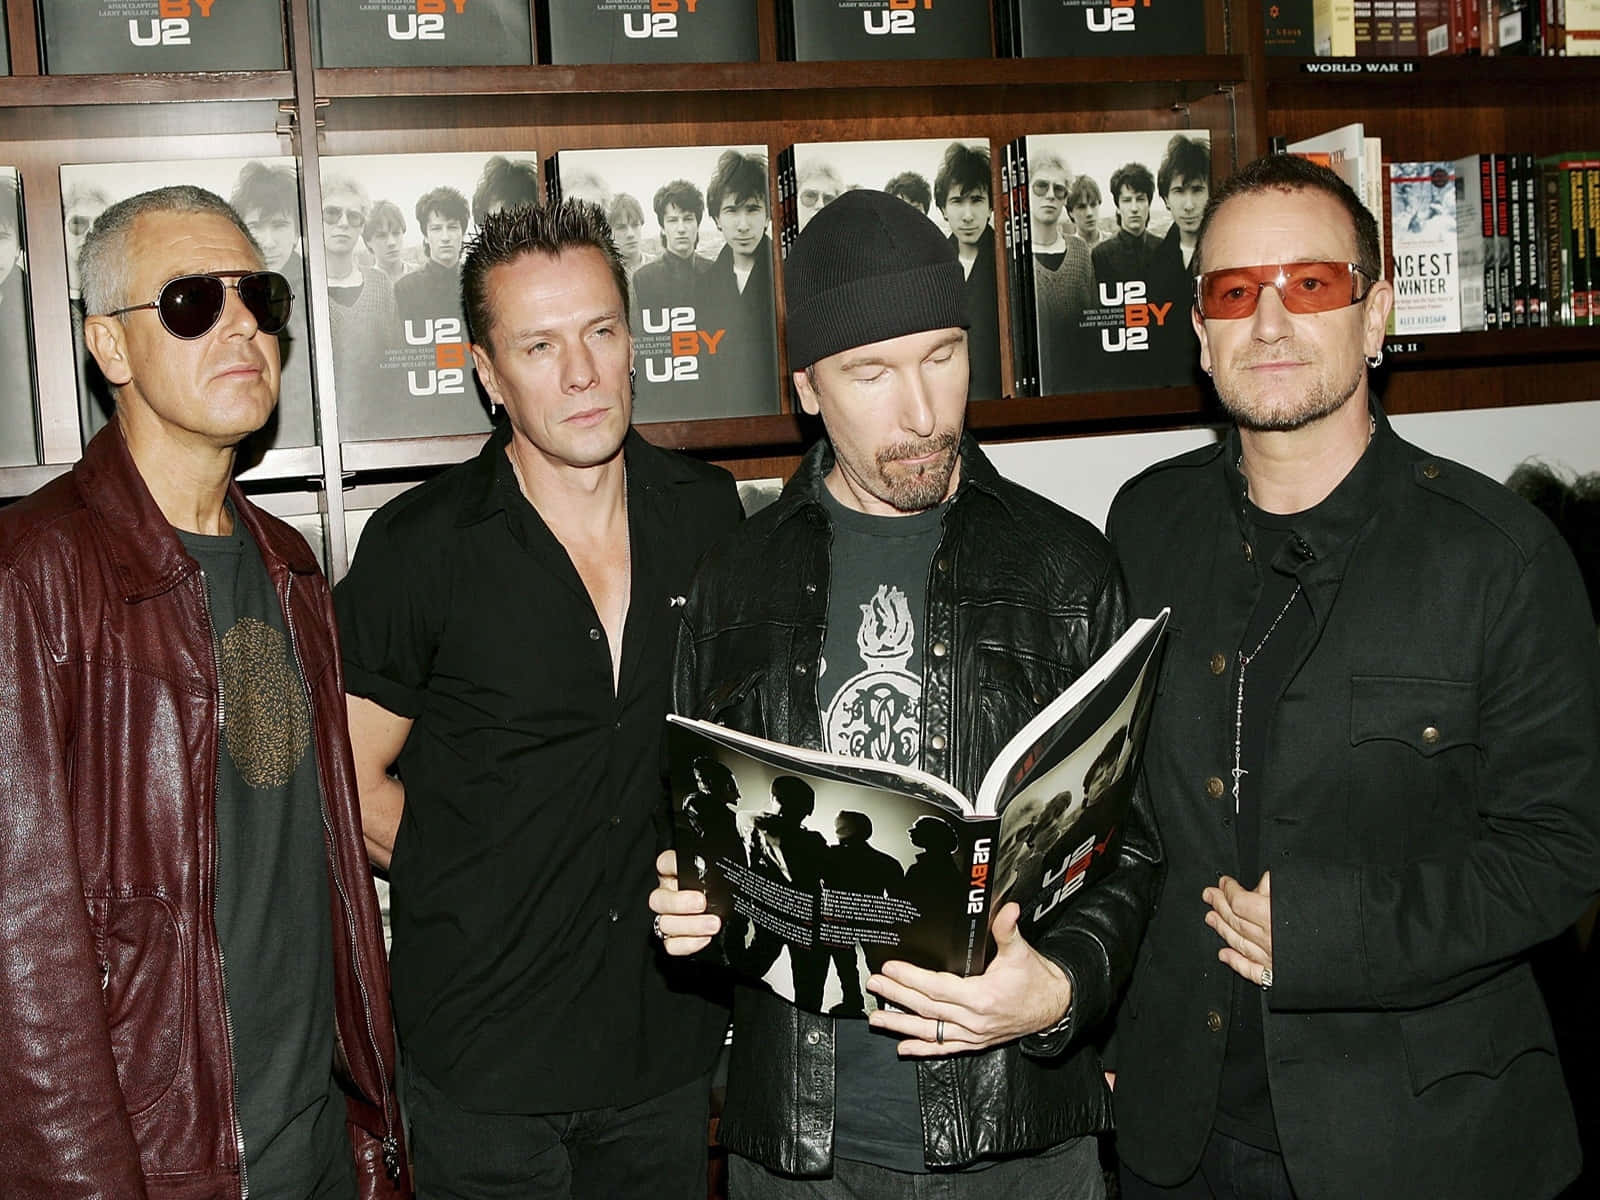 U2 Band In Concert — Performing Their Best Wallpaper